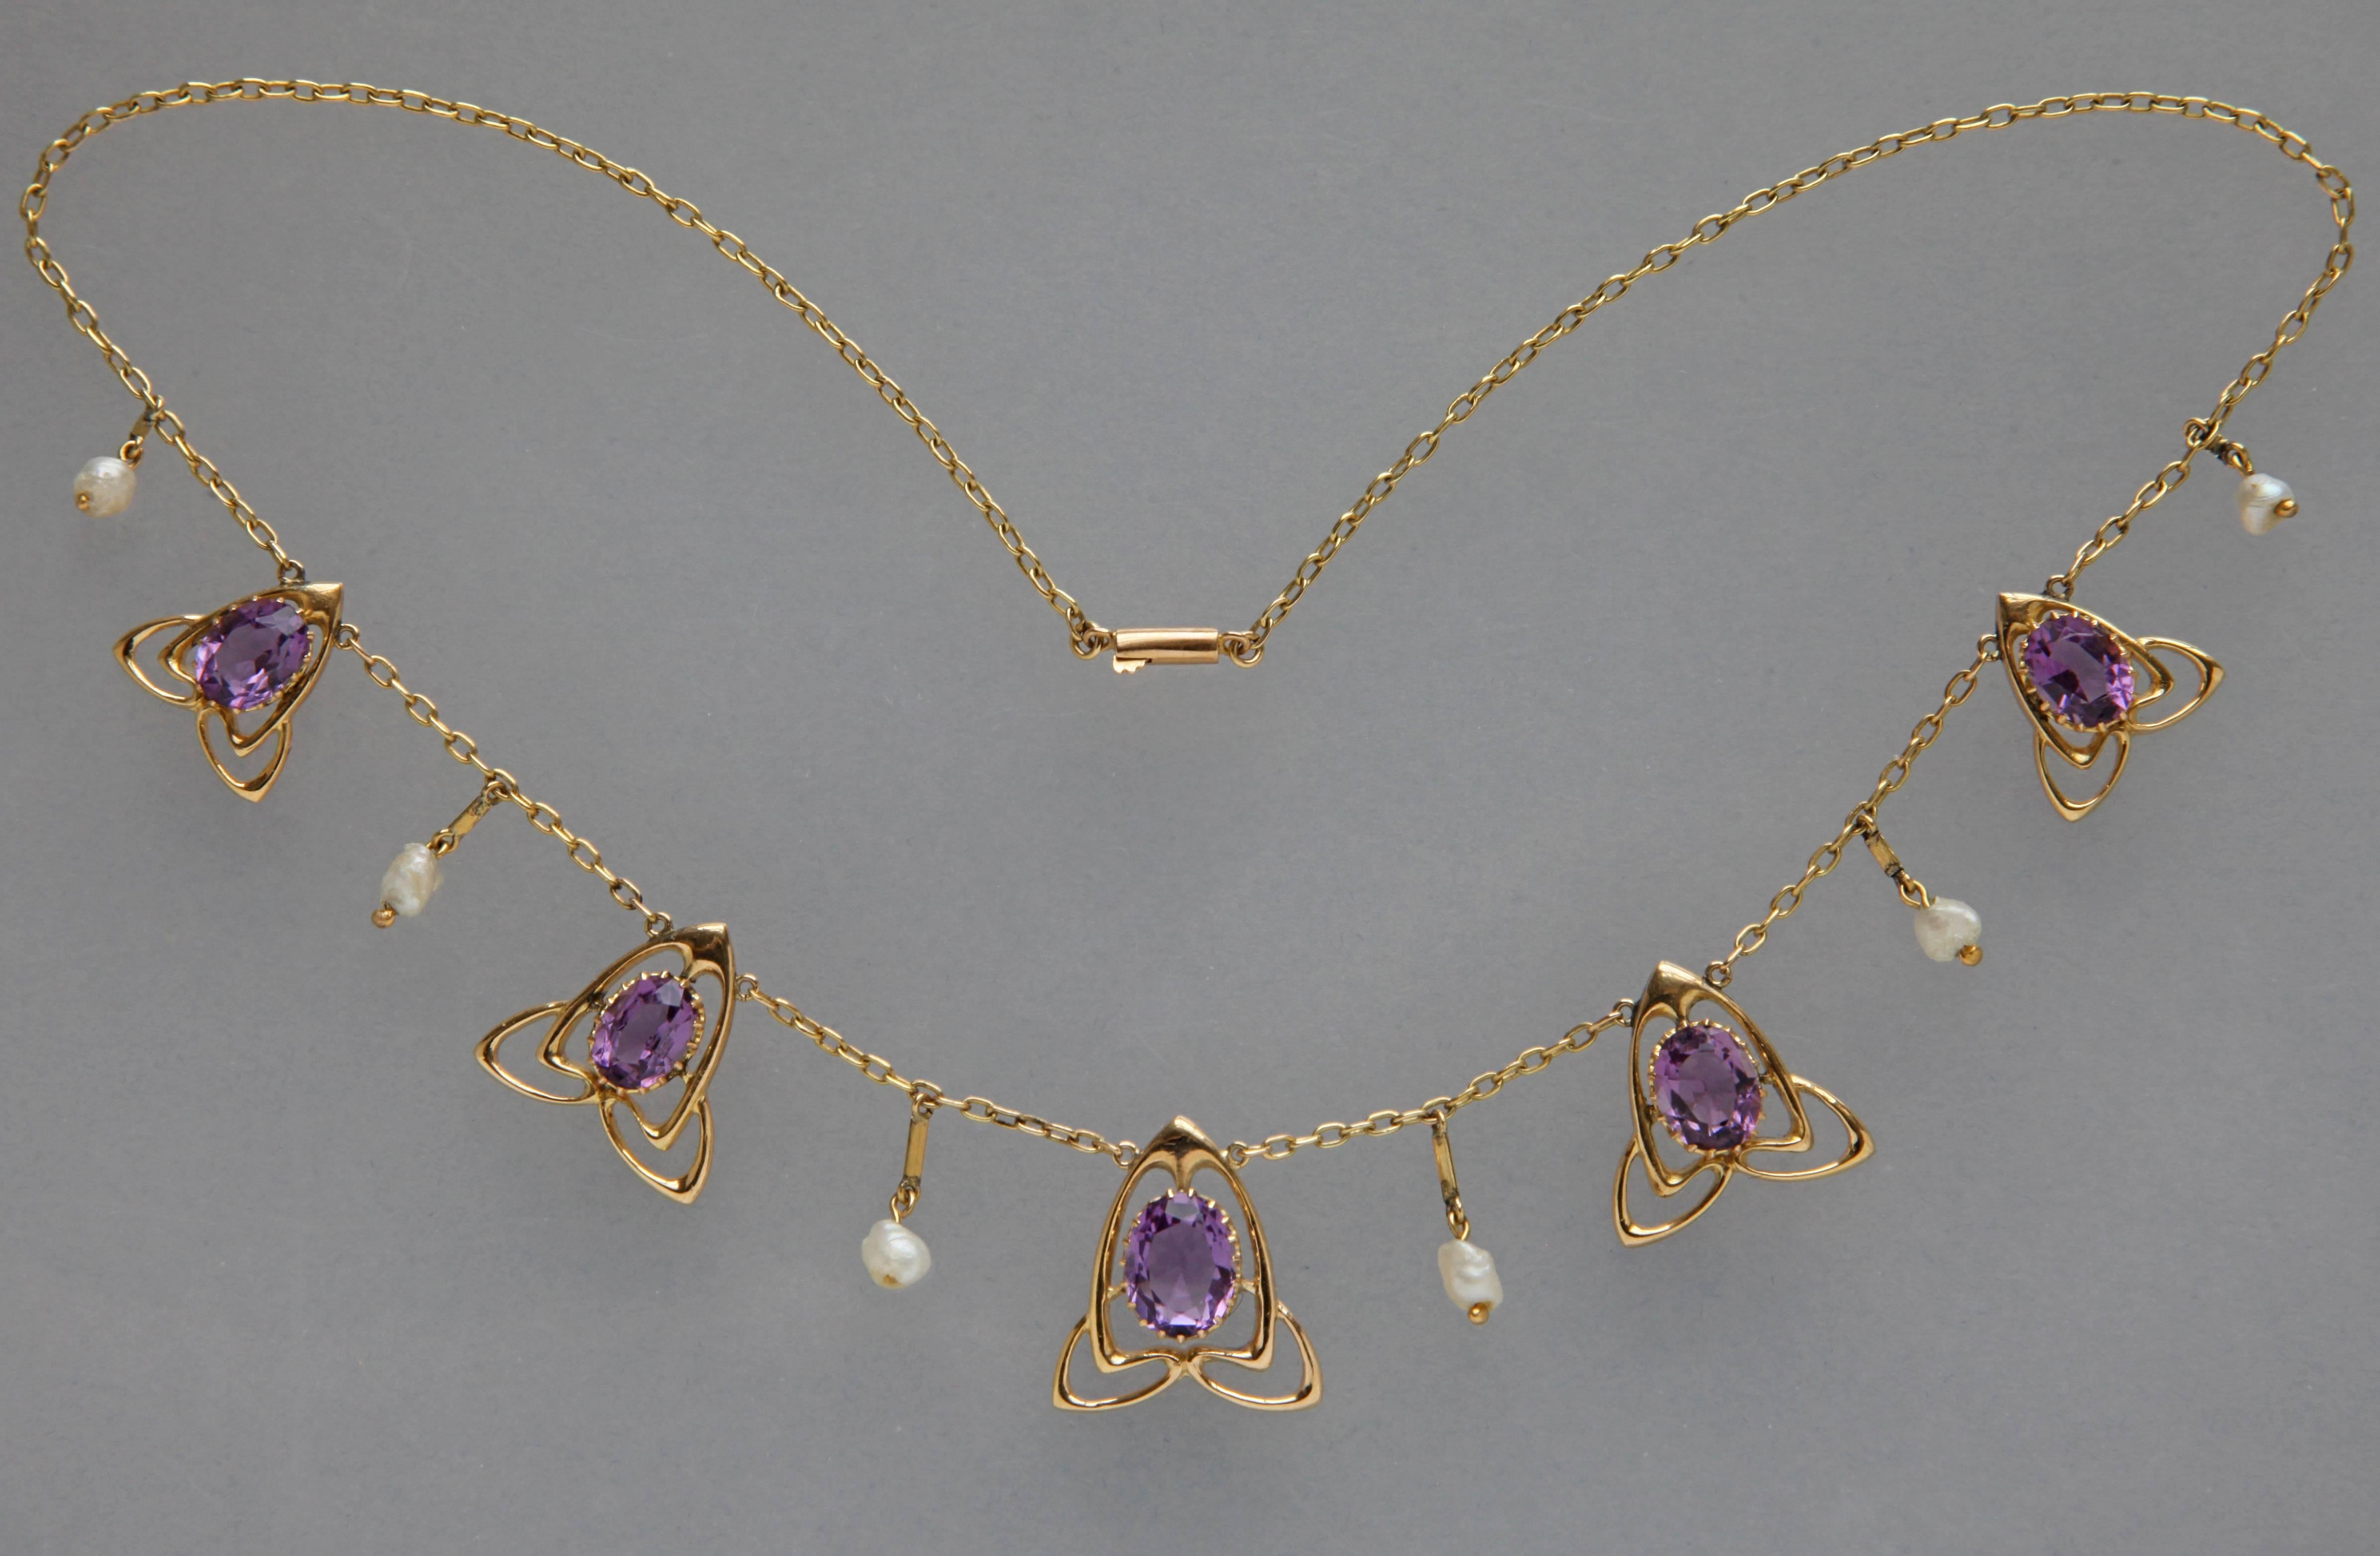 Archibald Knox Liberty & Co Amethyst Gold Necklace 1